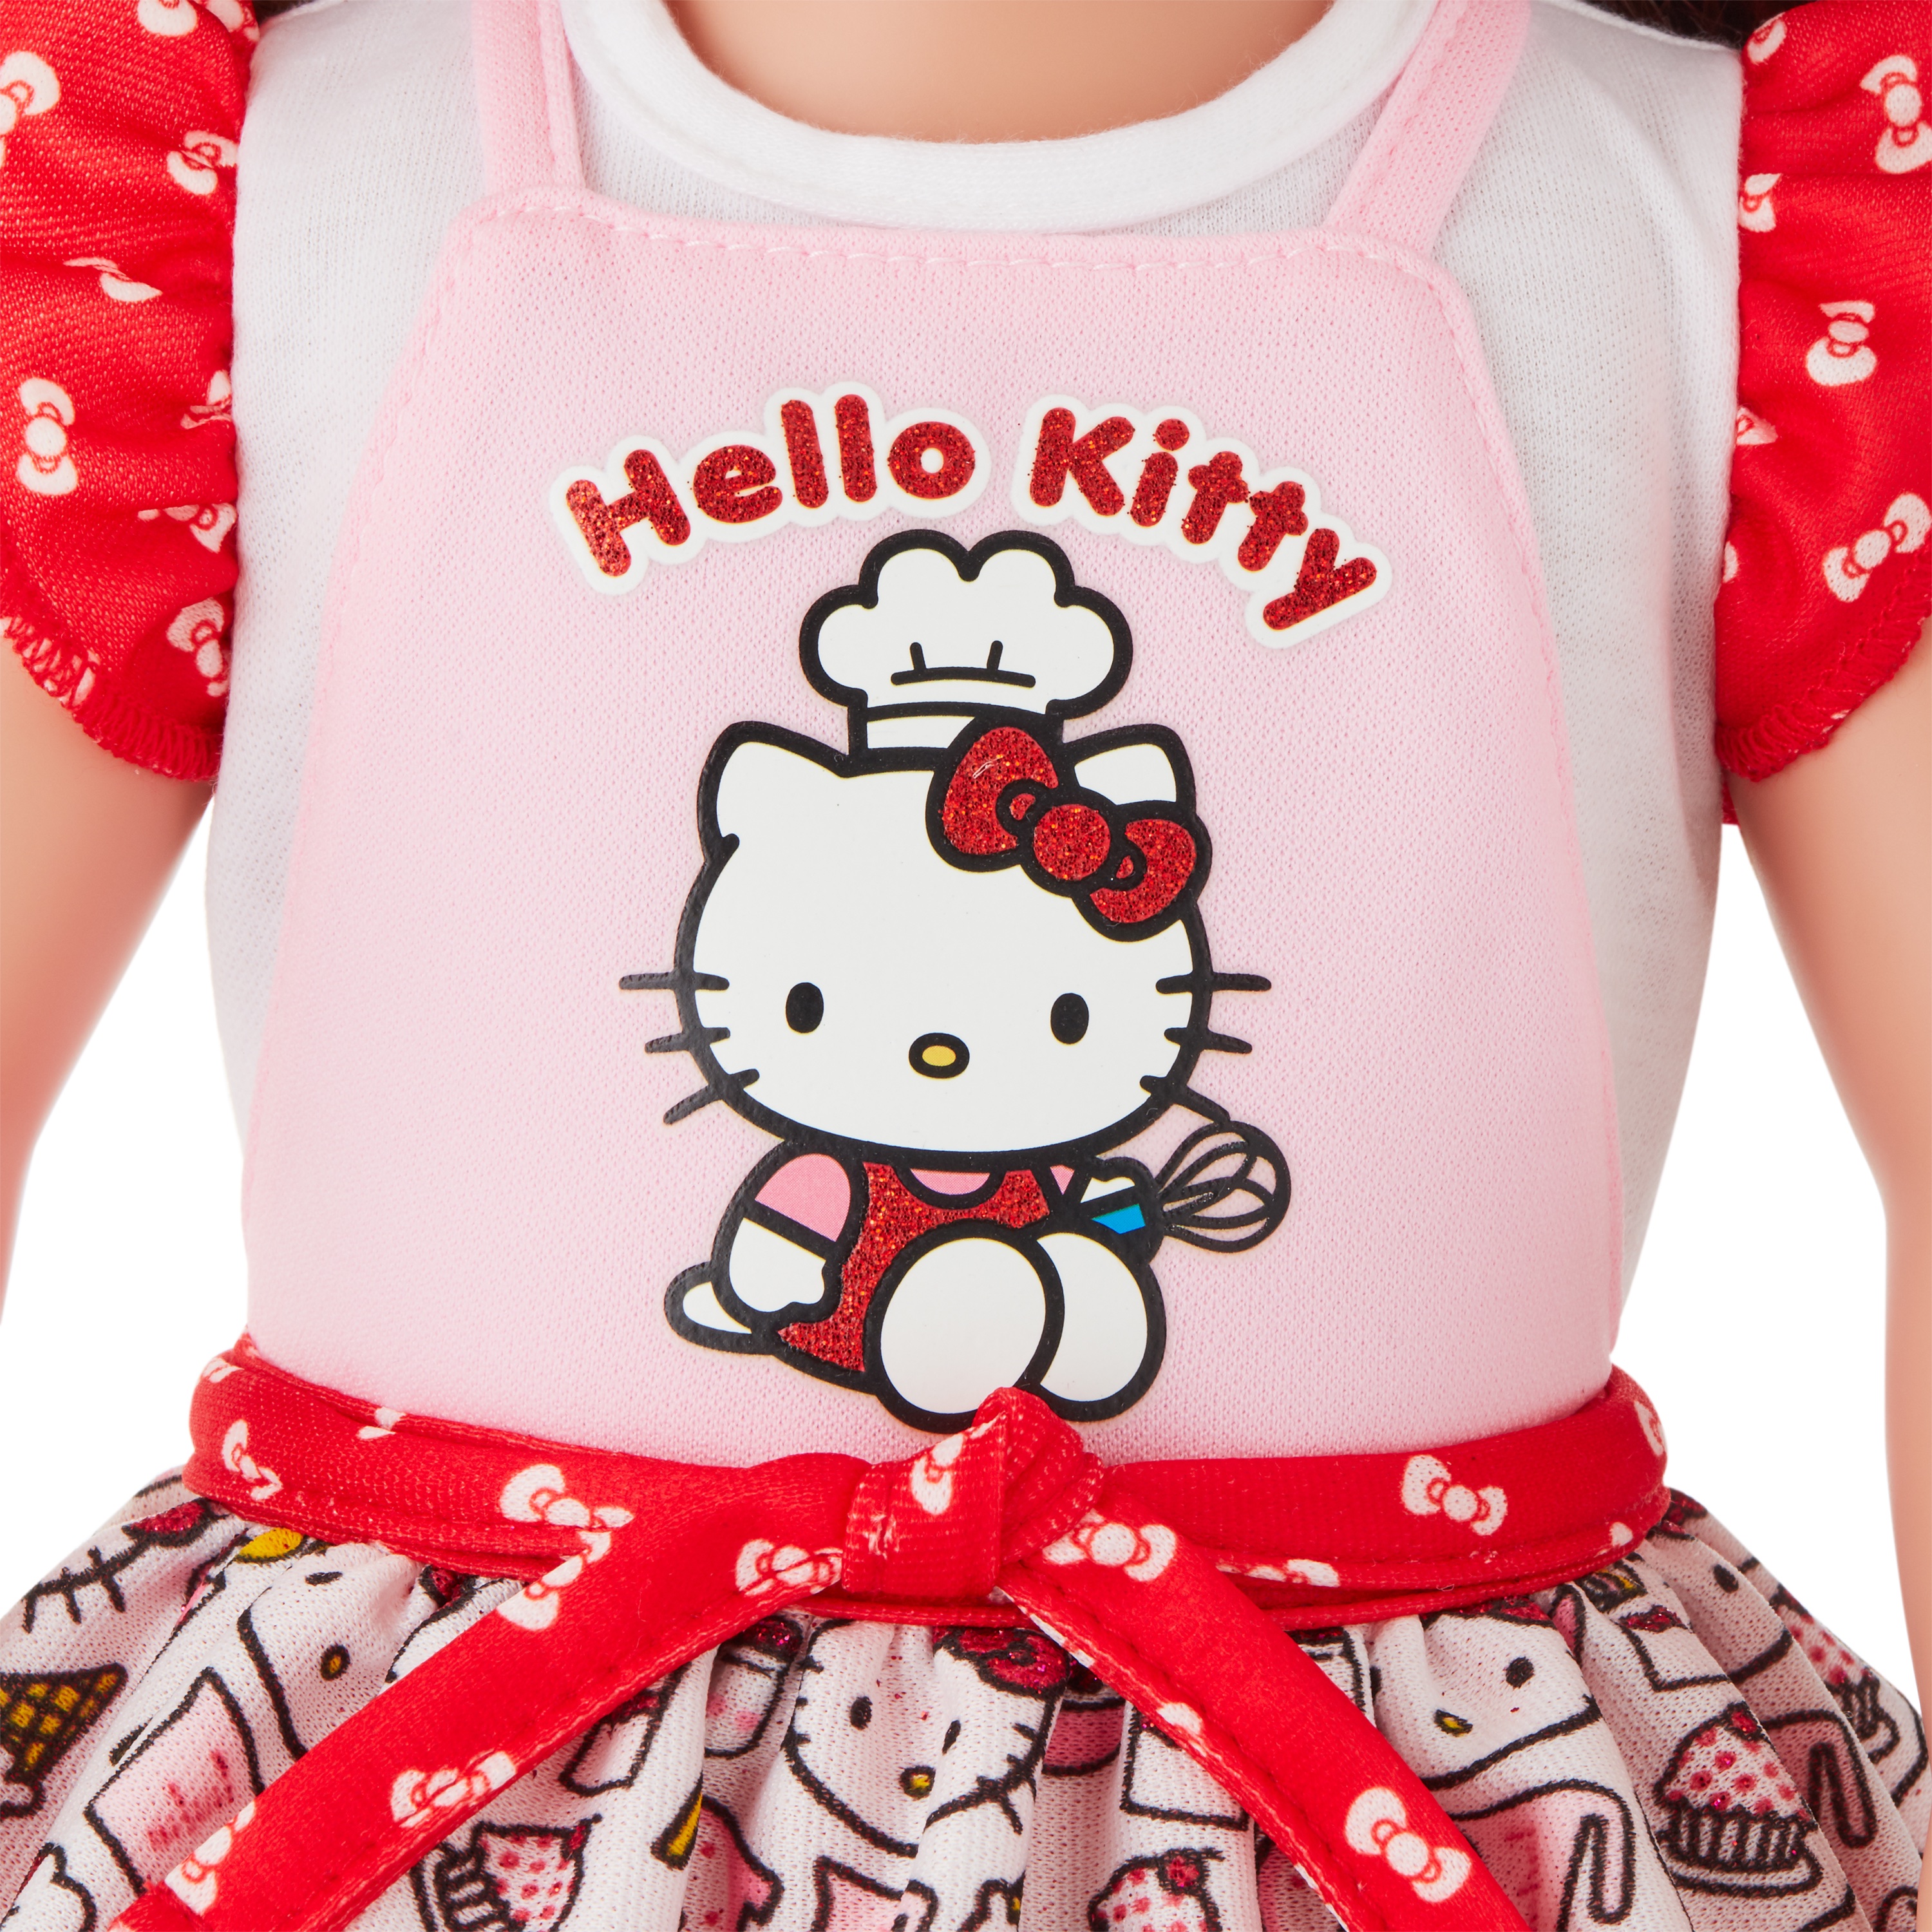 My Life As Poseable Hello Kitty Baker 18inch Doll, Brunette Hair, Brown Eyes - image 2 of 8